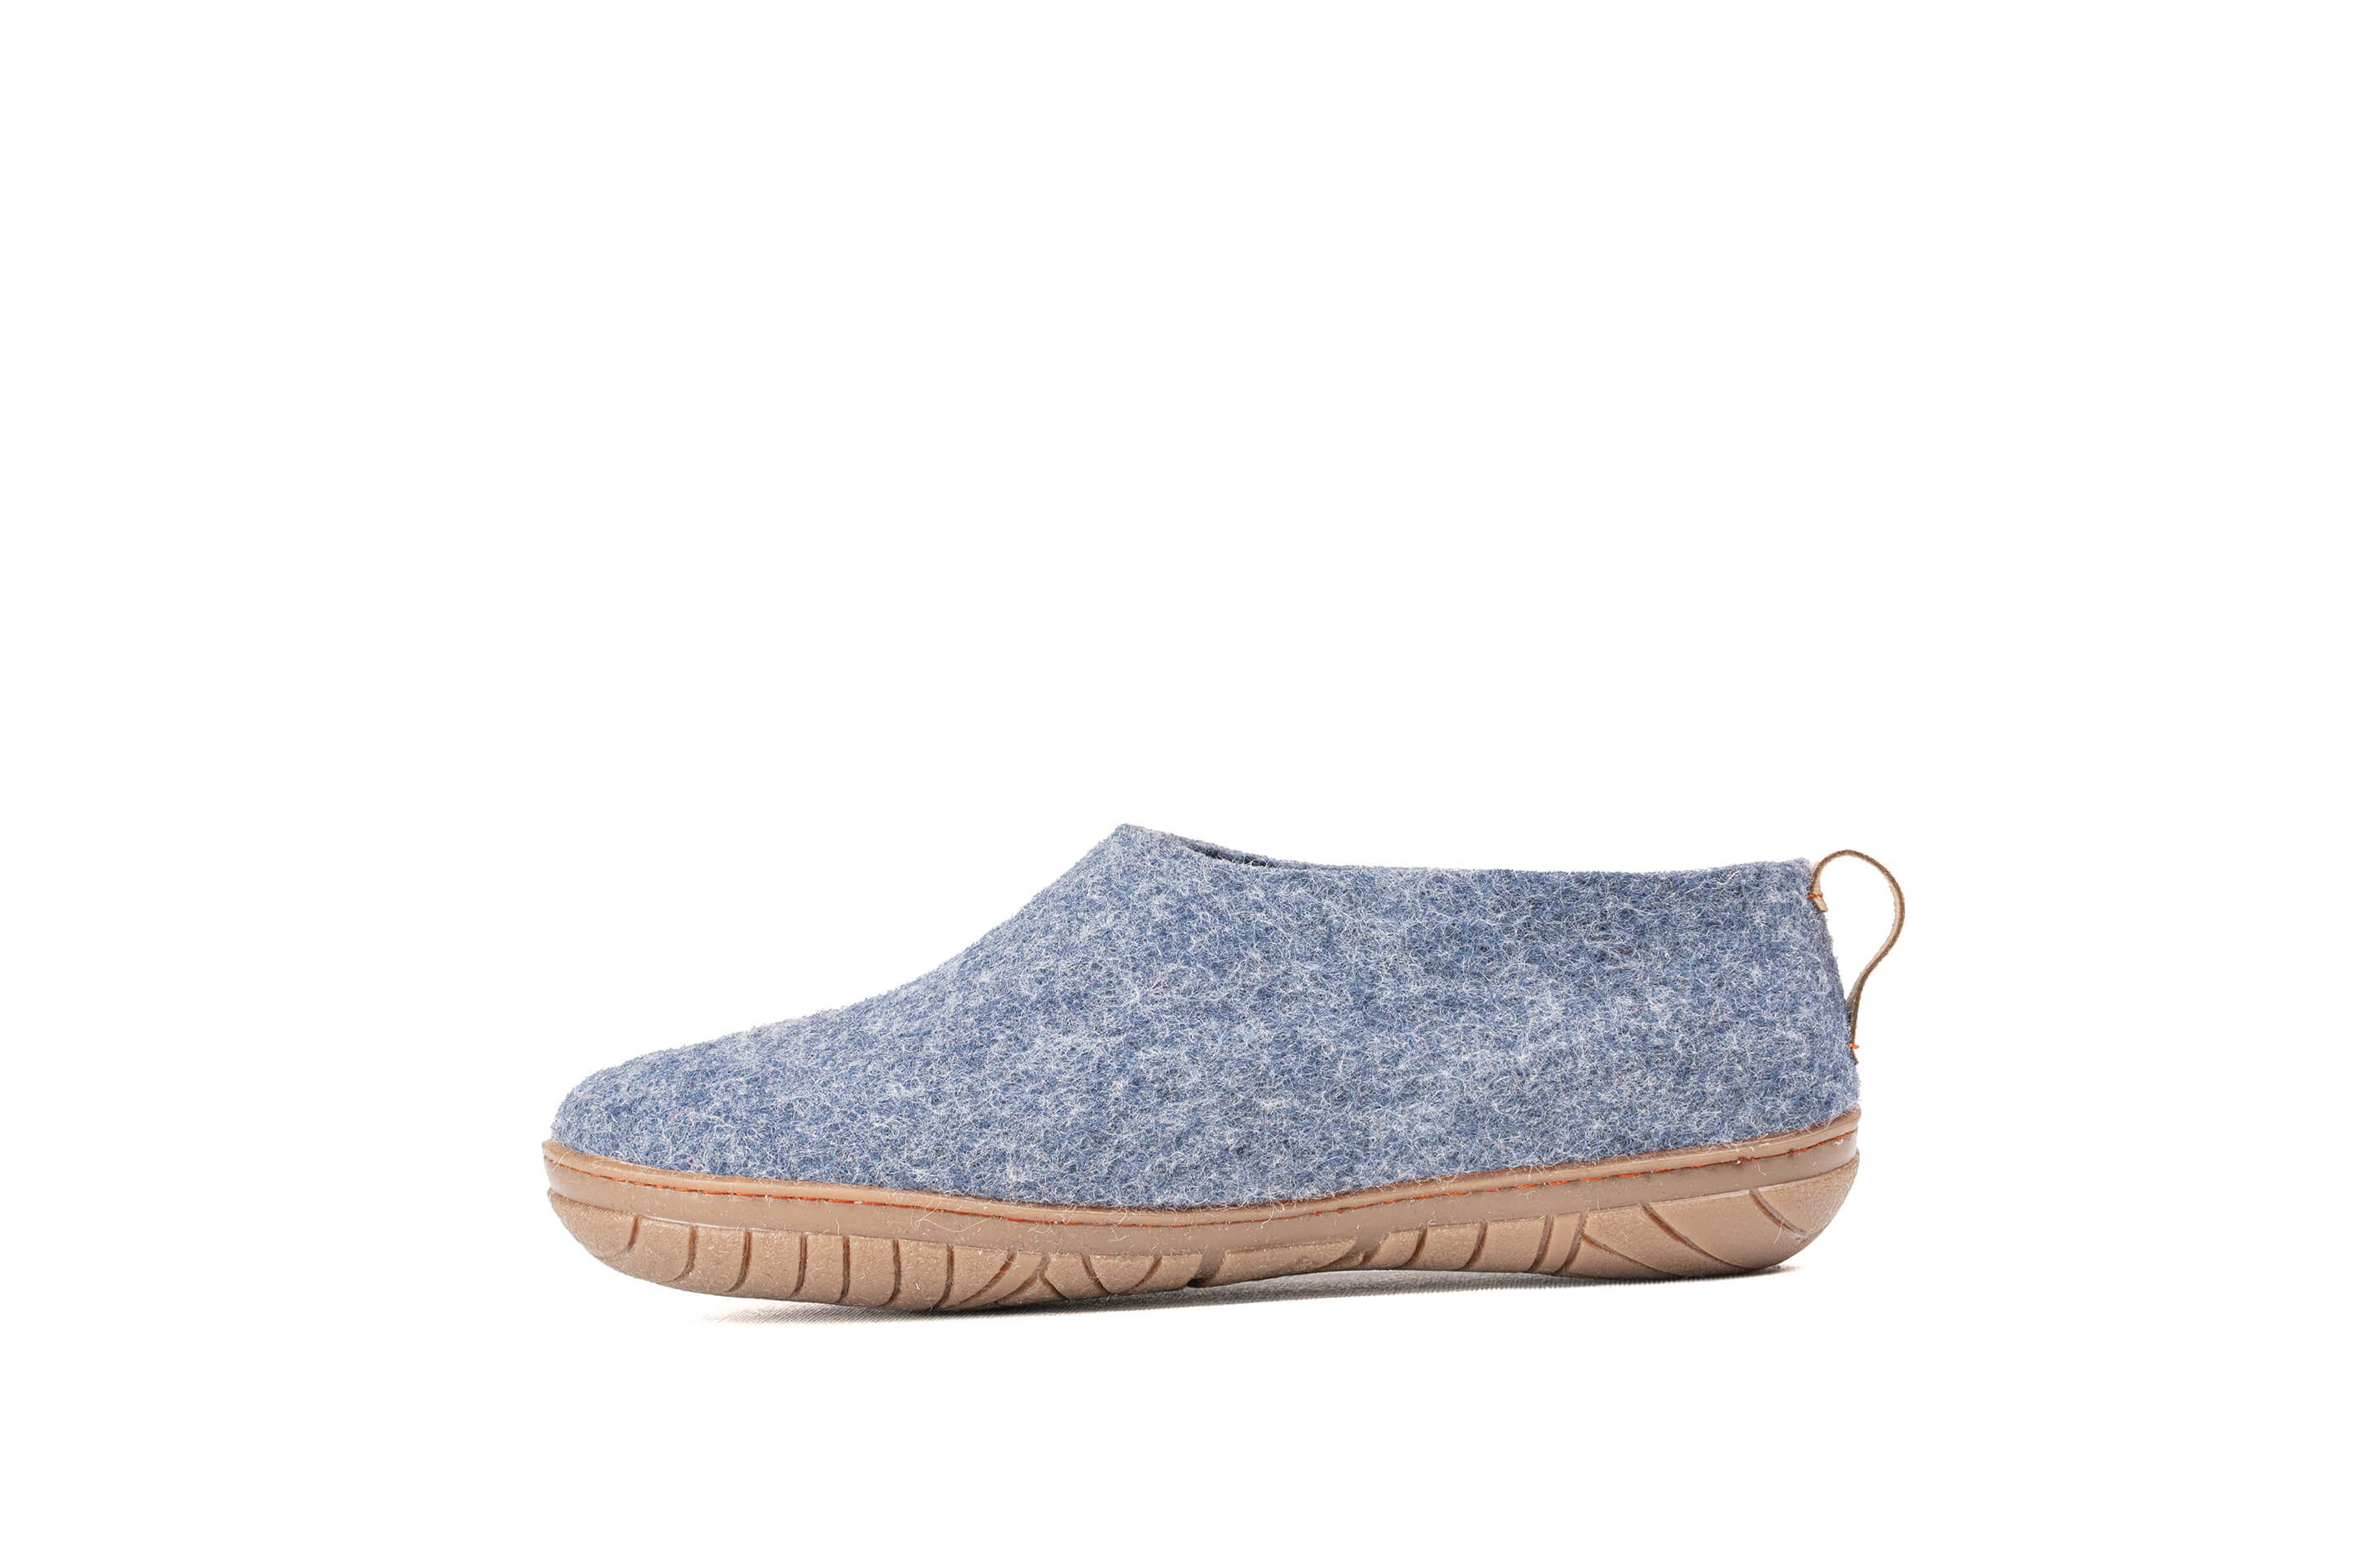 Outdoor Shoes With Rubber Sole - Denim